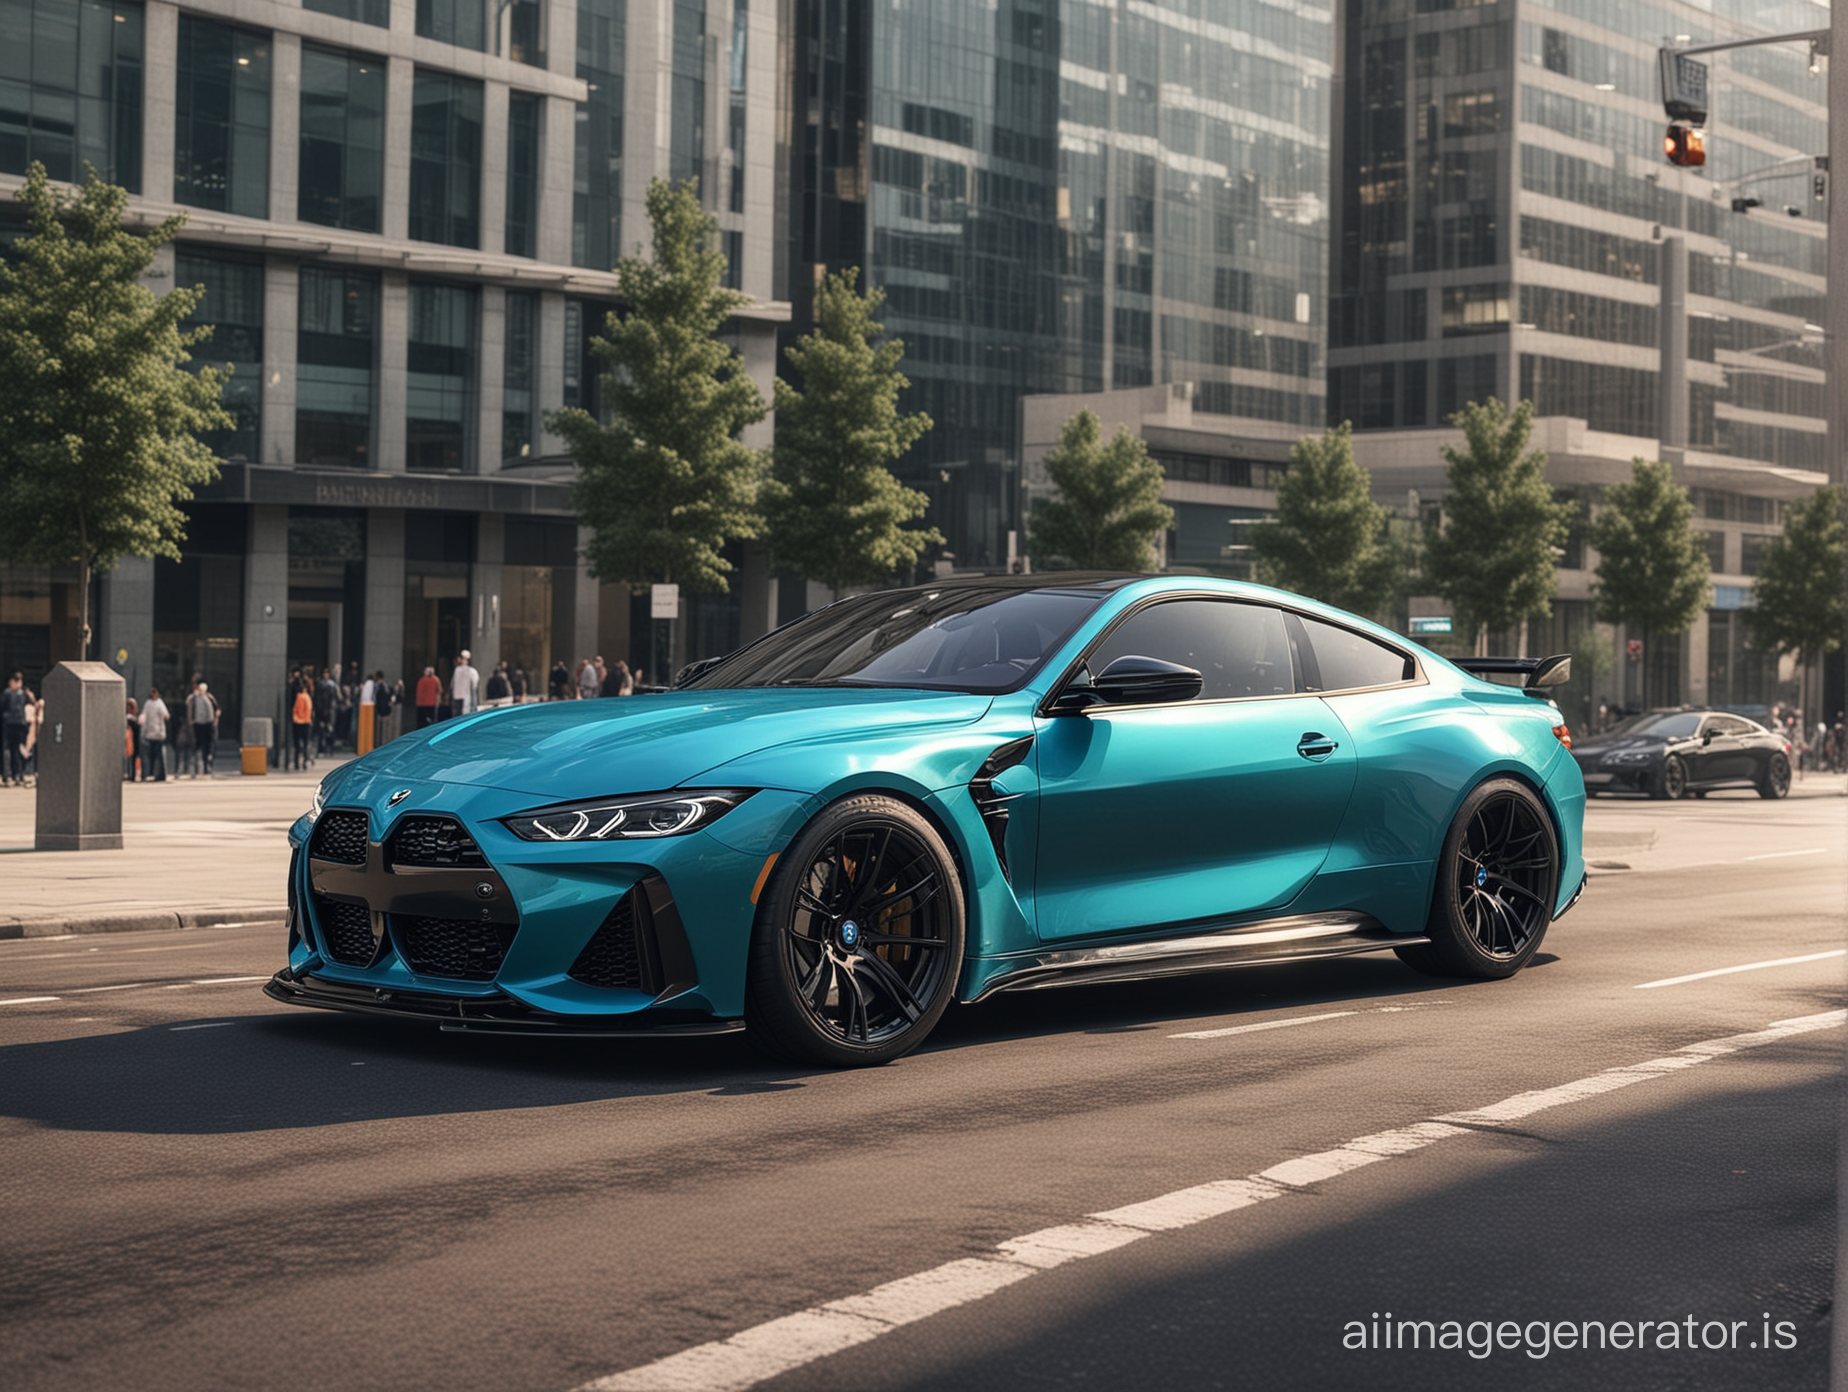 Khyzyl Saleem version of the 2021 BMW M4 combined with the Aston Martin Vantage Modern city, financial district